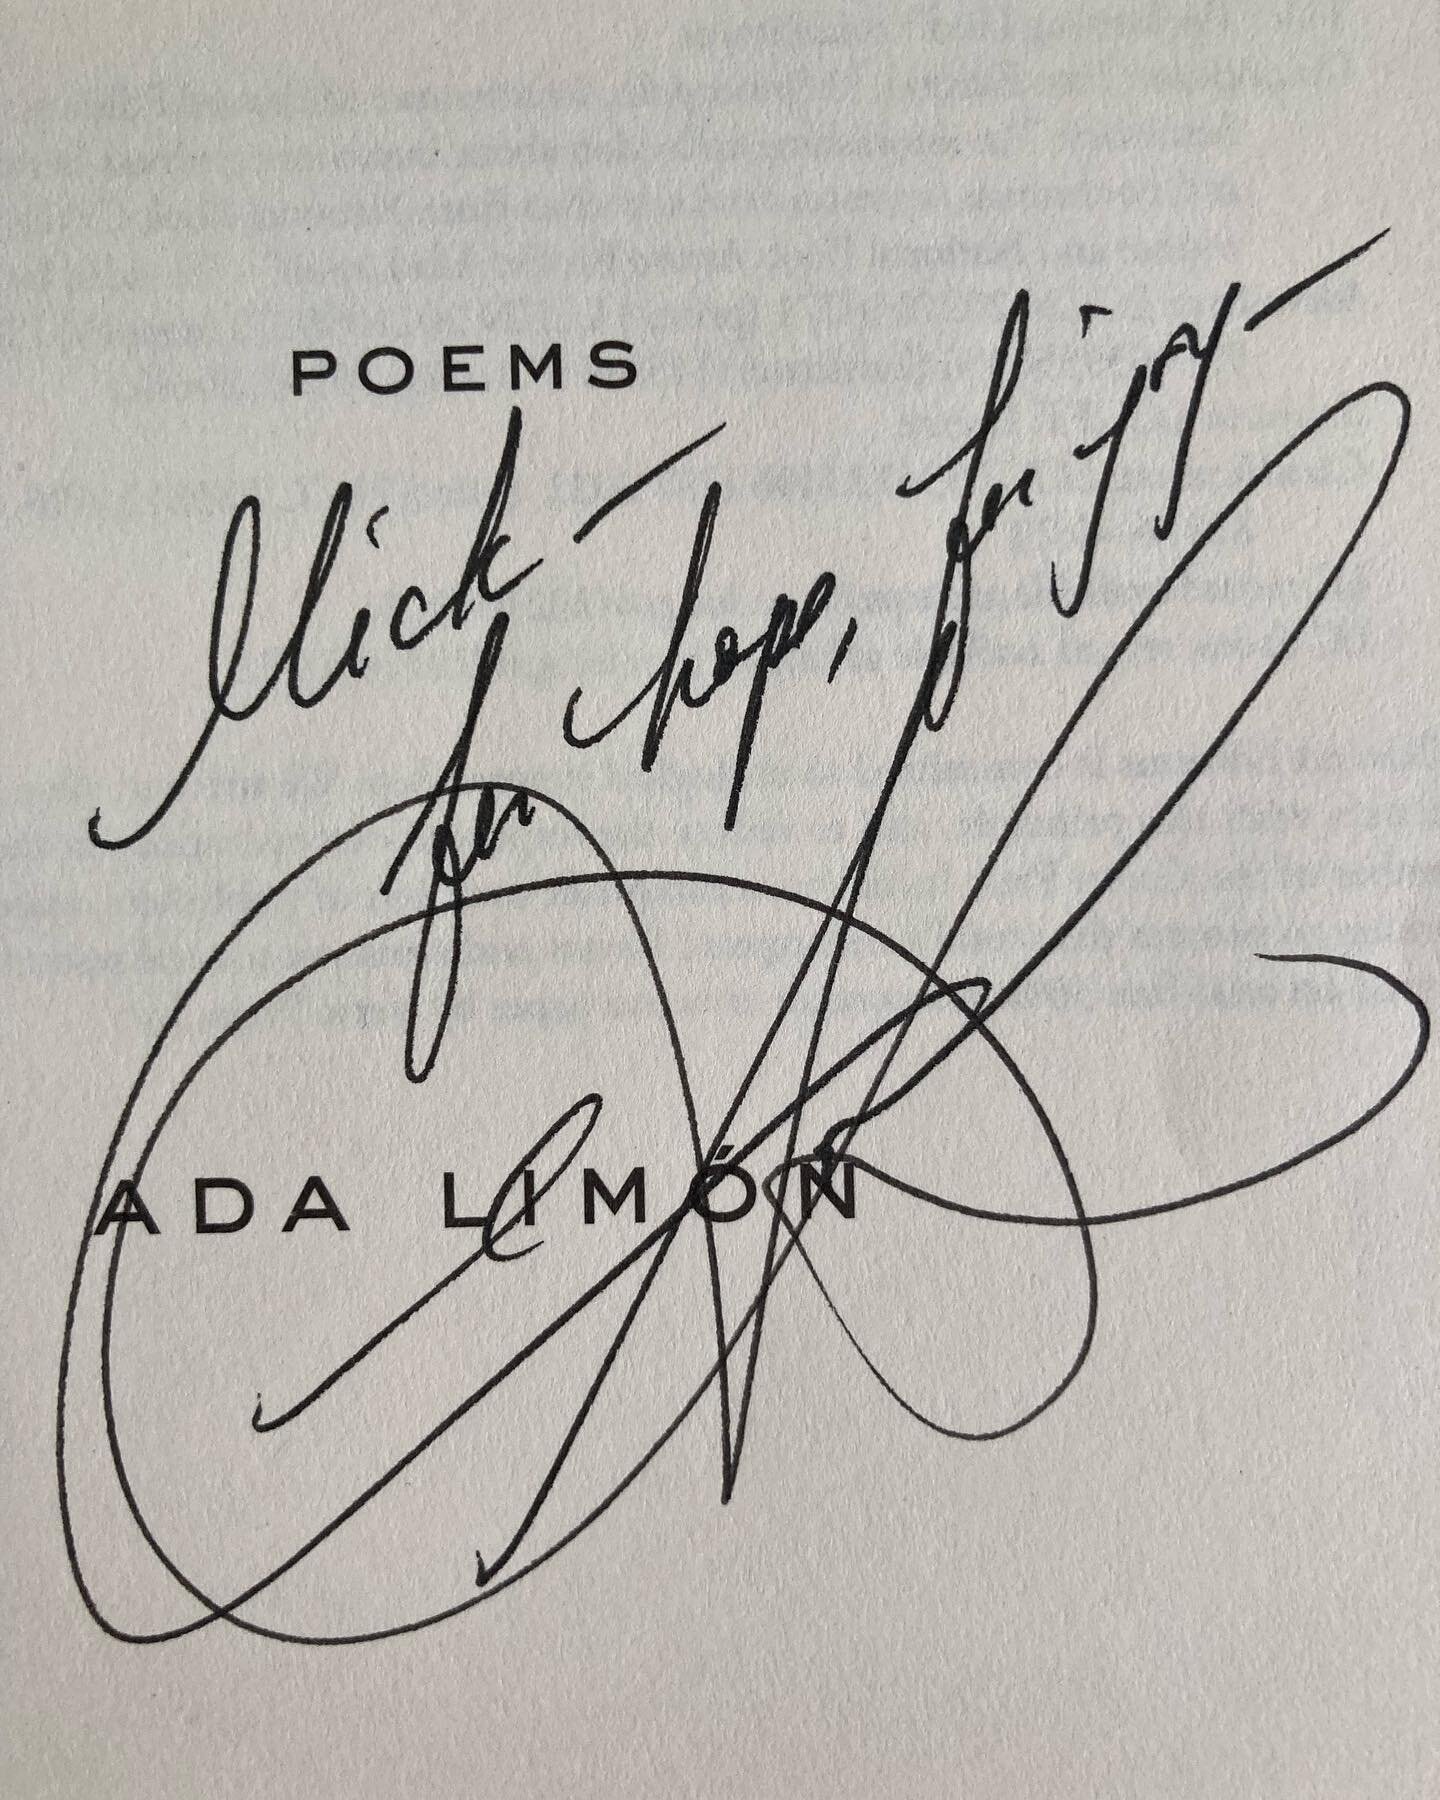 &quot;for hope, for joy.&quot; 

so thankful for a poetry-rich week, complete with a workshop, reading, and signing with the indomitable spirit of @adalimonwriter . huge thanks to @porchtn for orchestrating such incredible experiences ❤️